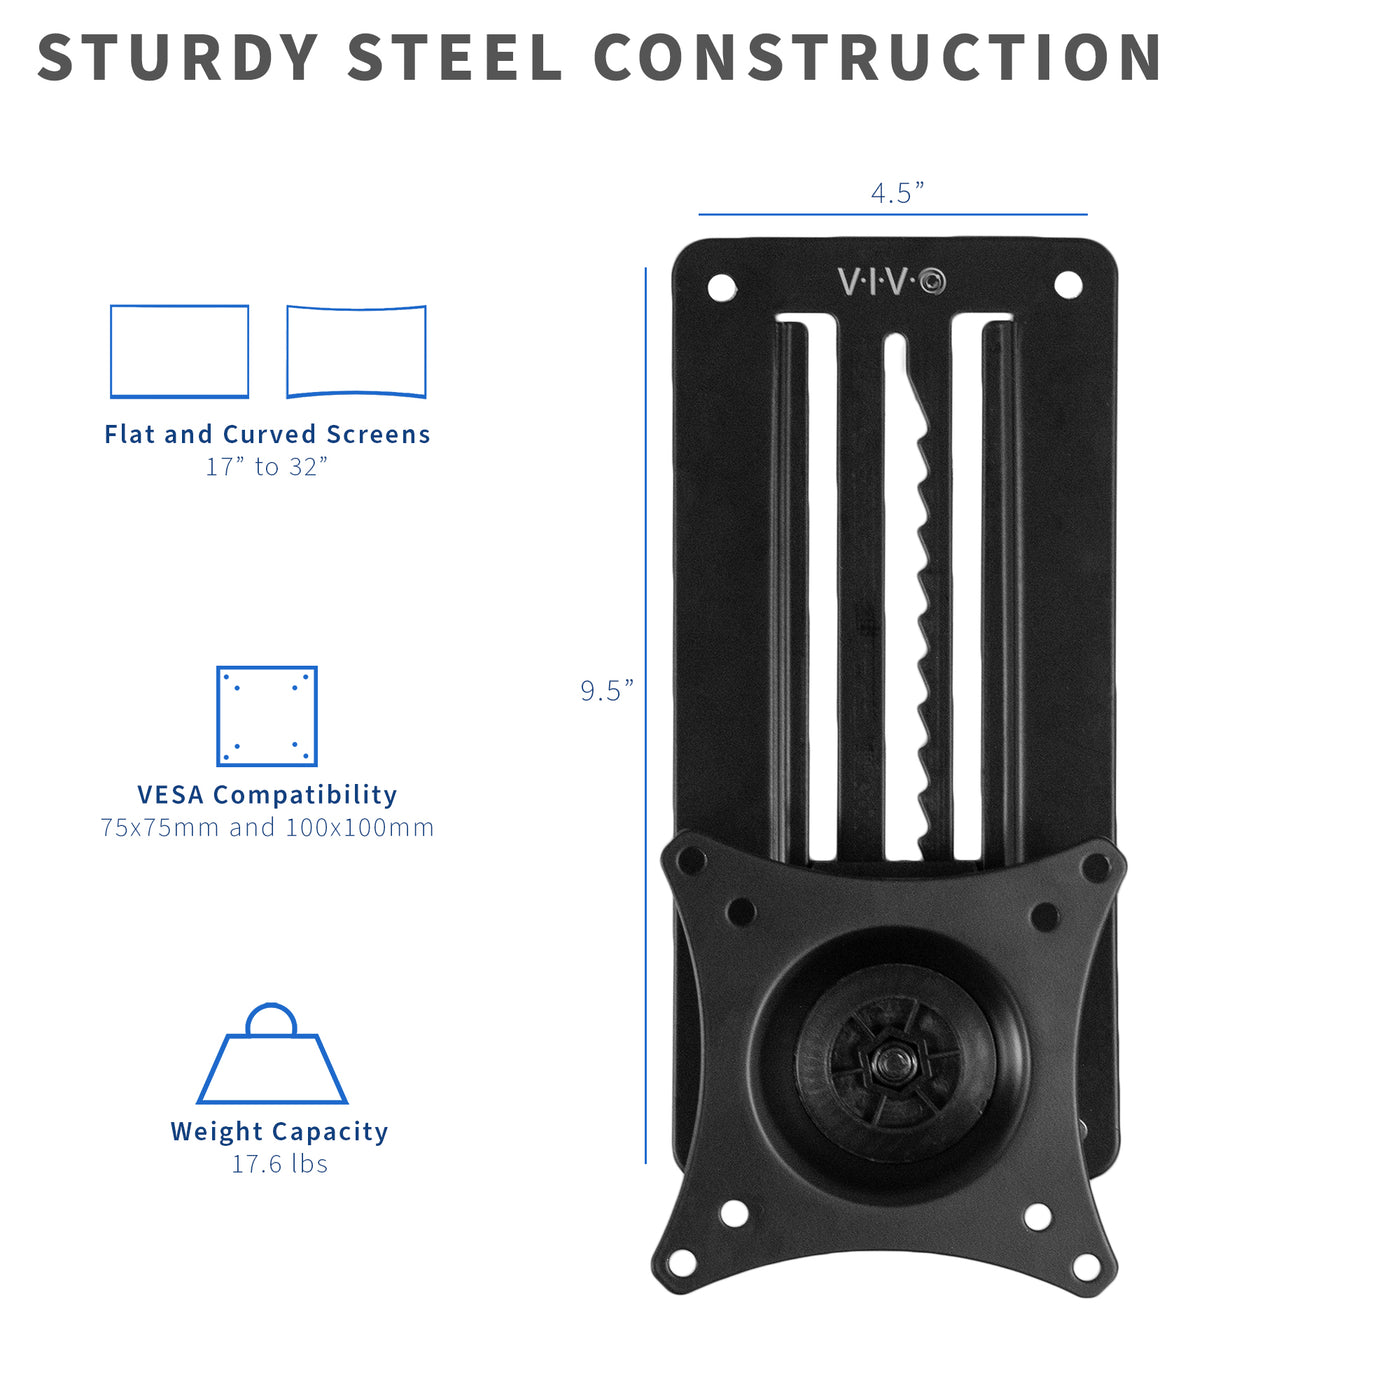 Sturdy steel VESA wall mount with articulation and height adjustment.